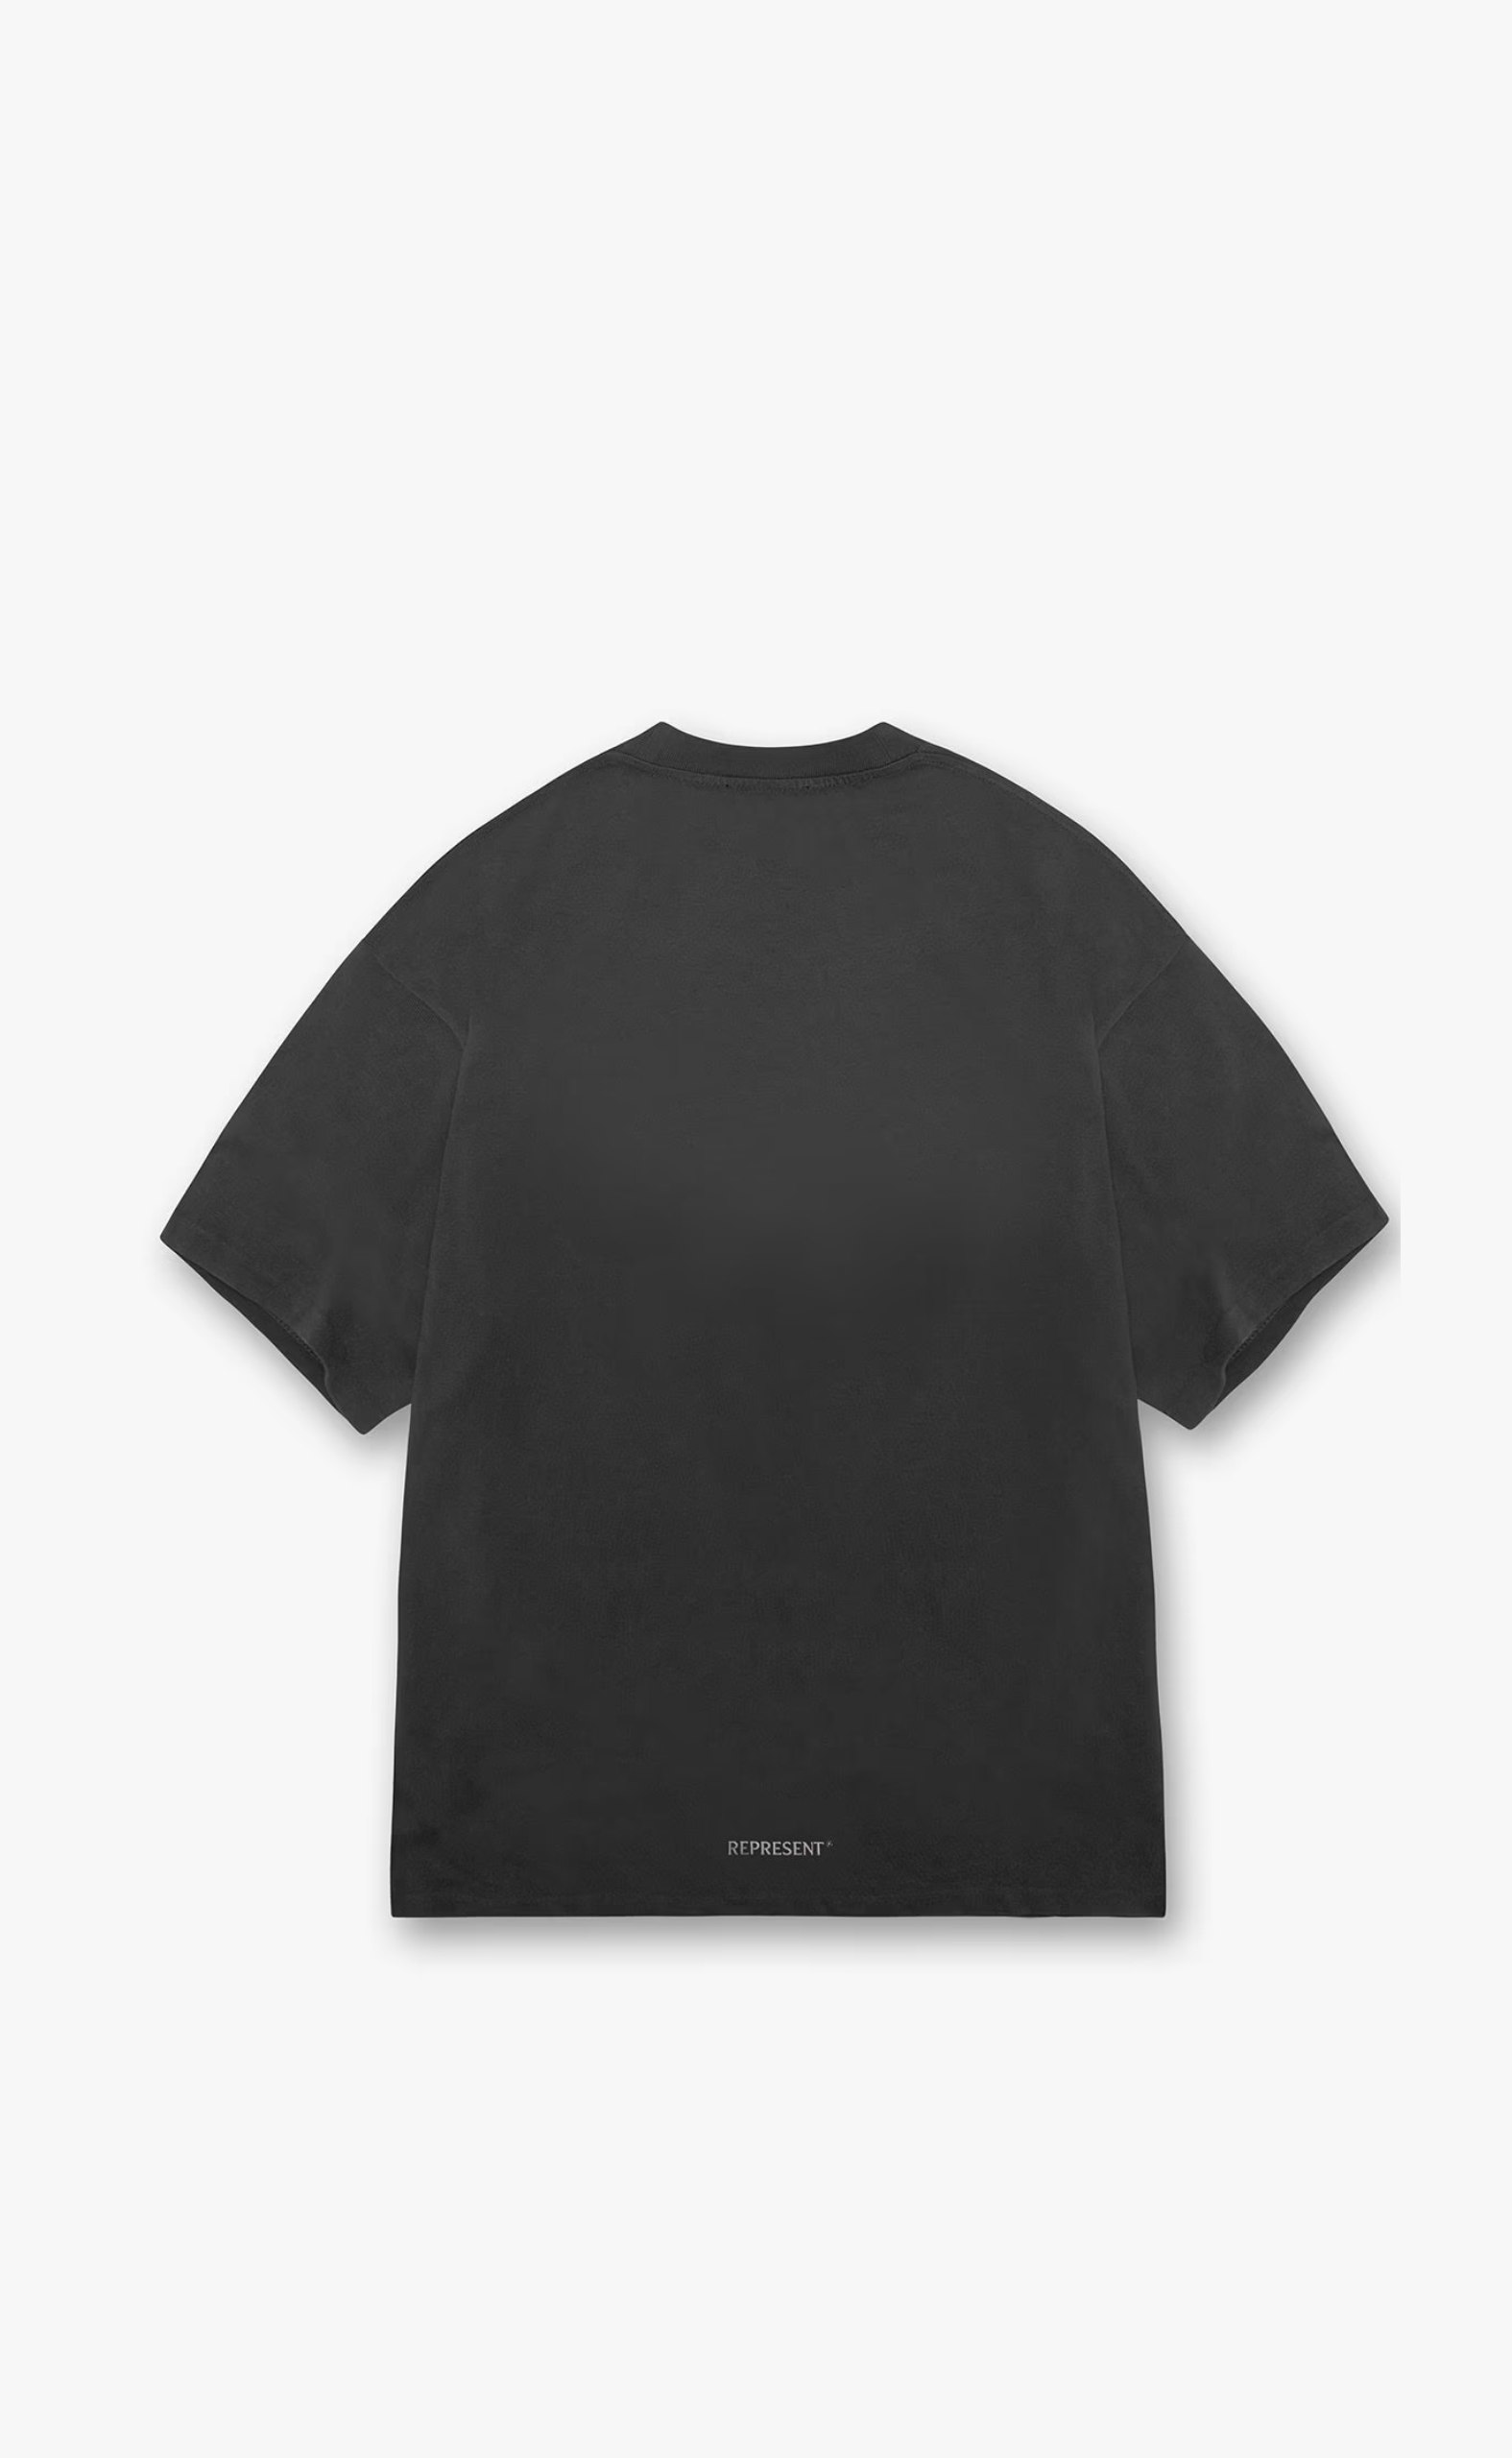 CLASSIC PARTS WASHED BLACK T-SHIRT